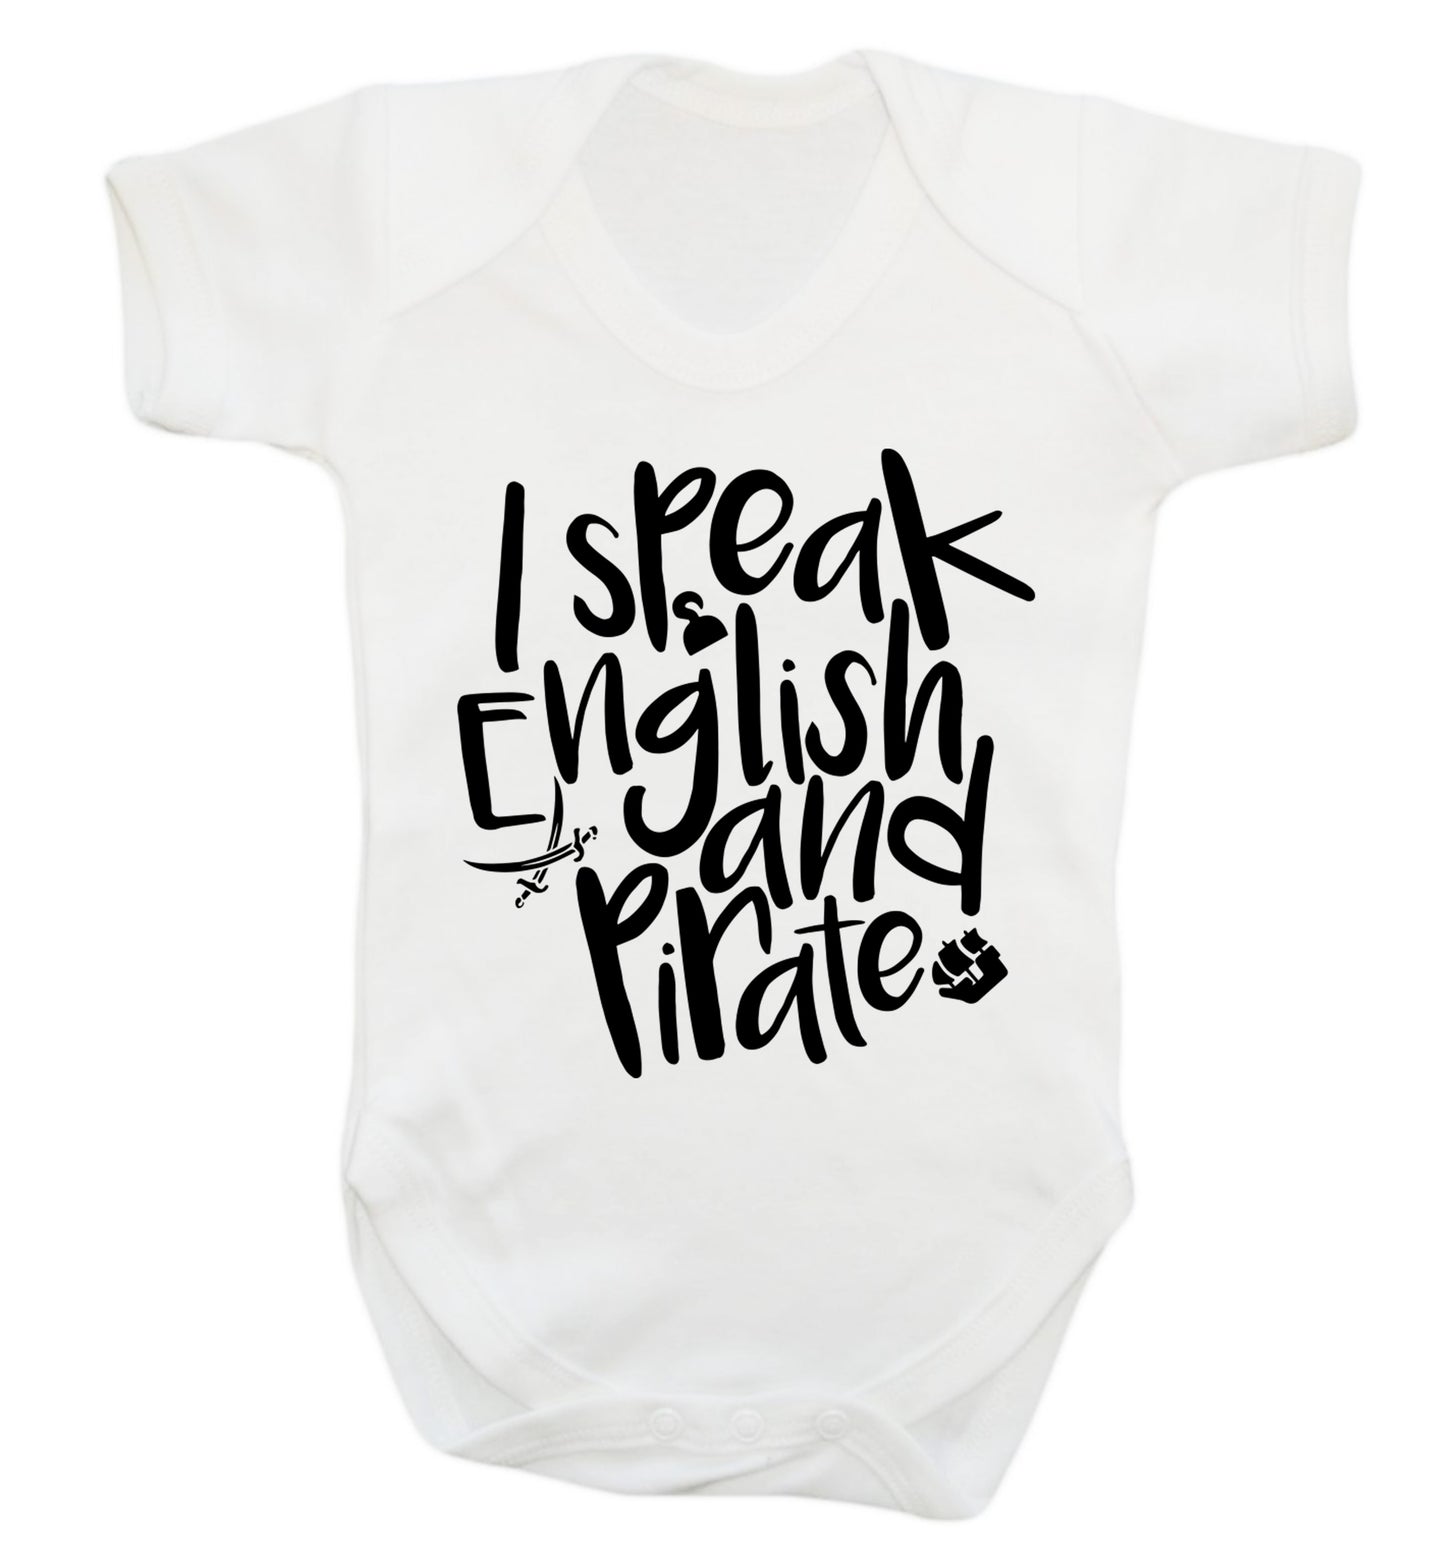 I speak English and pirate Baby Vest white 18-24 months